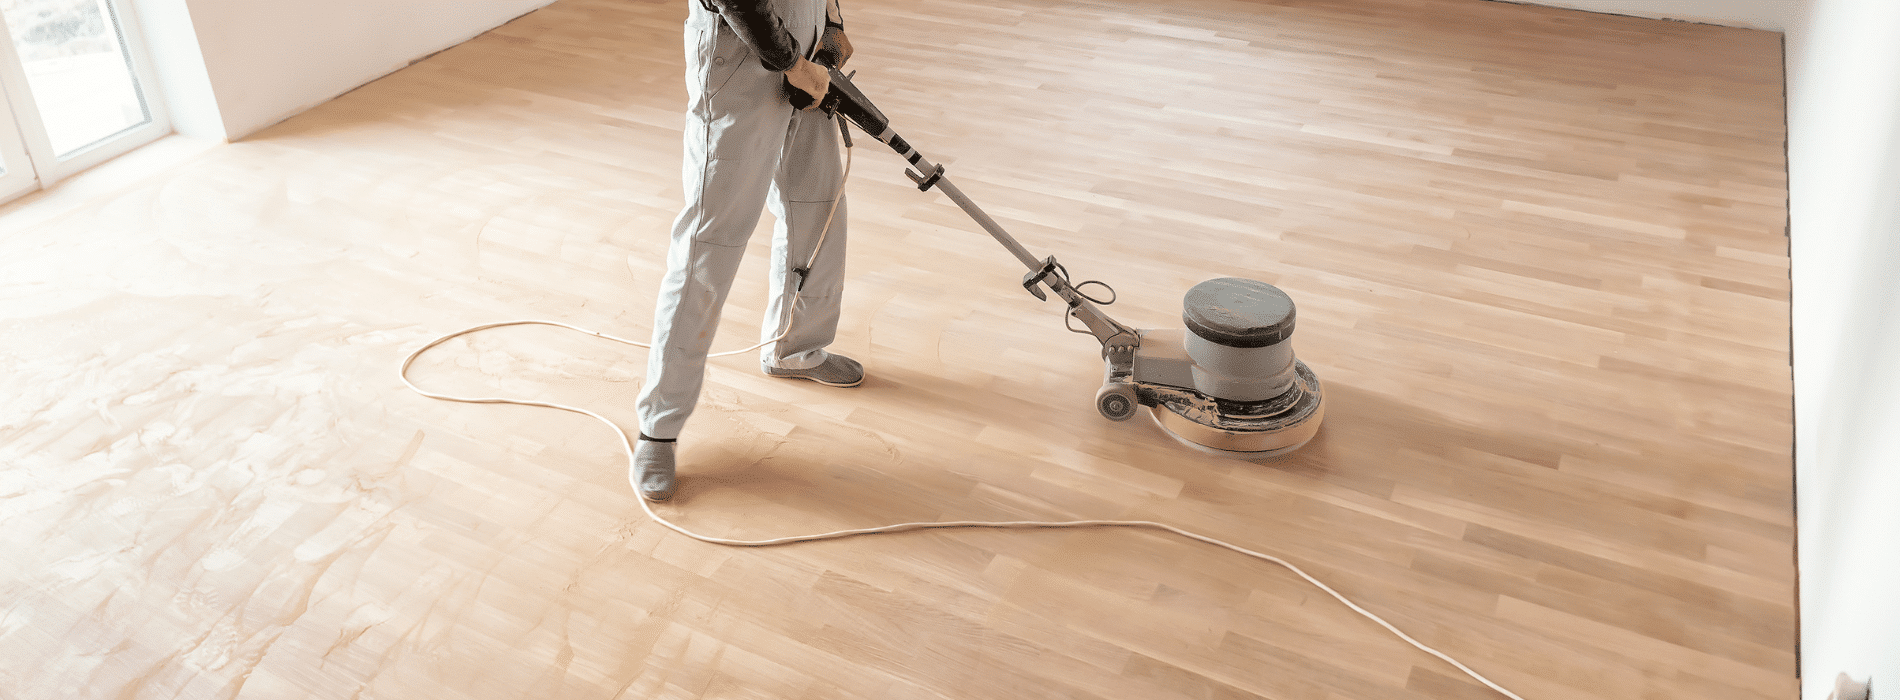 In Earls Court, SW5, Mr Sander® are using a Bona FlexiSand 1.5, a powerful floor buffer sander with a Ø 407 mm dimension and 1.5 kW effect. Operating at 230V and 50 Hz/60 Hz, it's connected to a dust extraction system equipped with a HEPA filter for optimal cleanliness and efficiency during the sanding of a parquet floor.